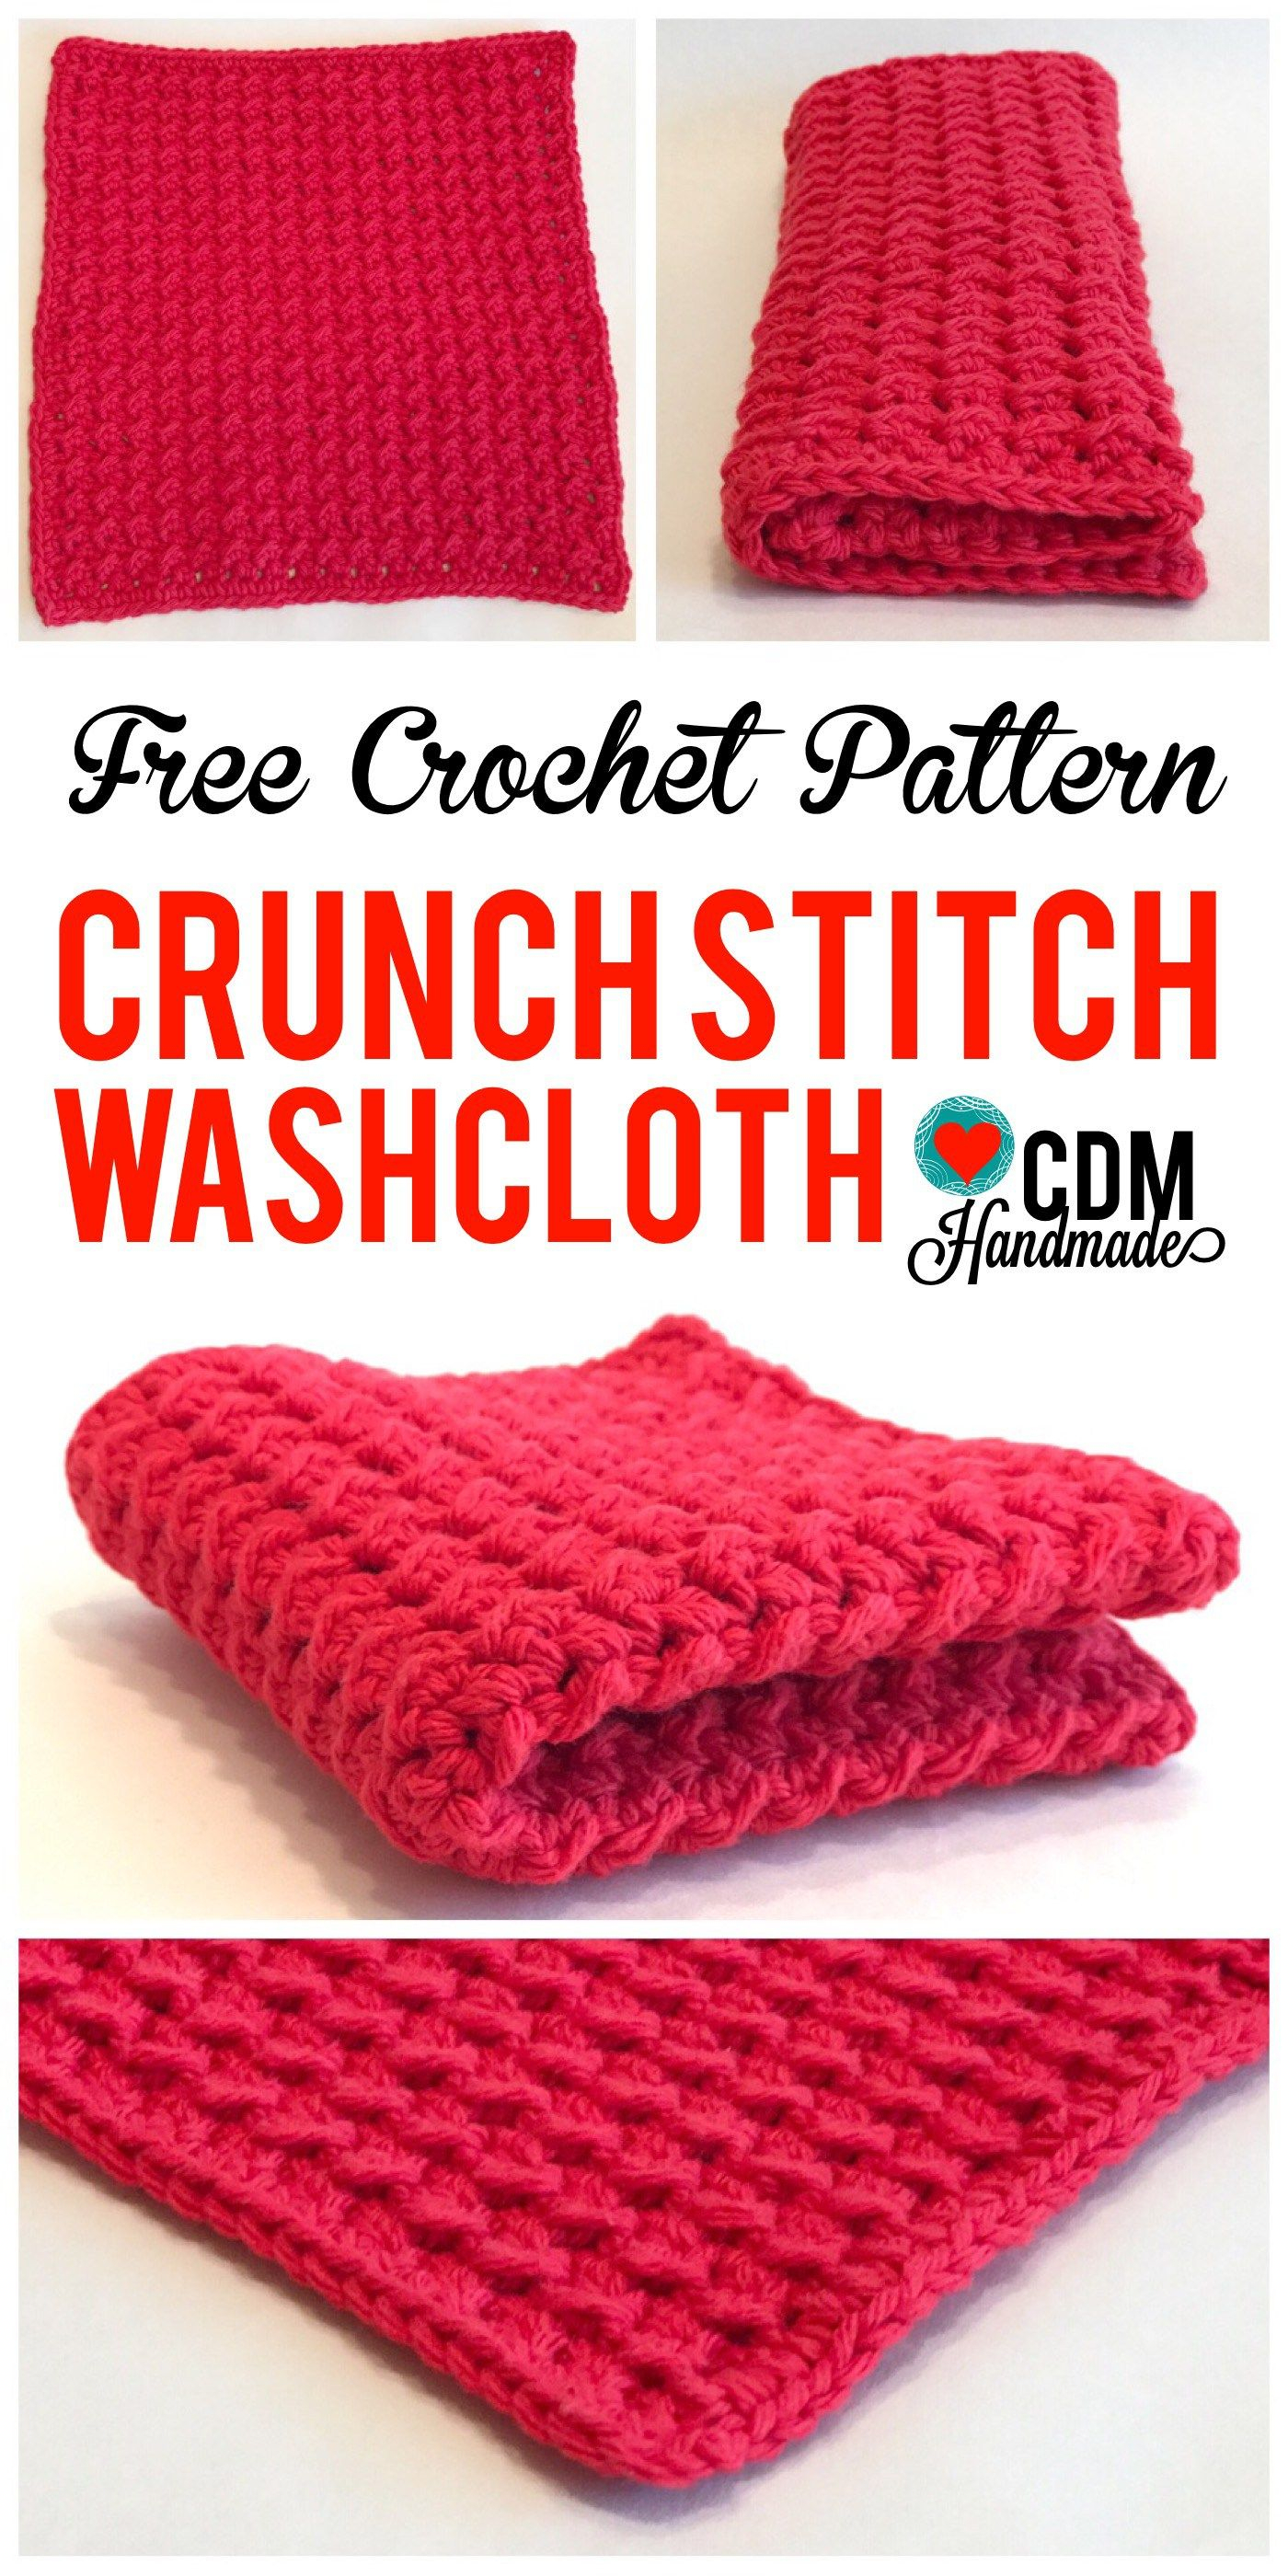 Crochet Face Washer Pattern Check Out This Quick And Easy Free Crochet Washcloth Pattern For My